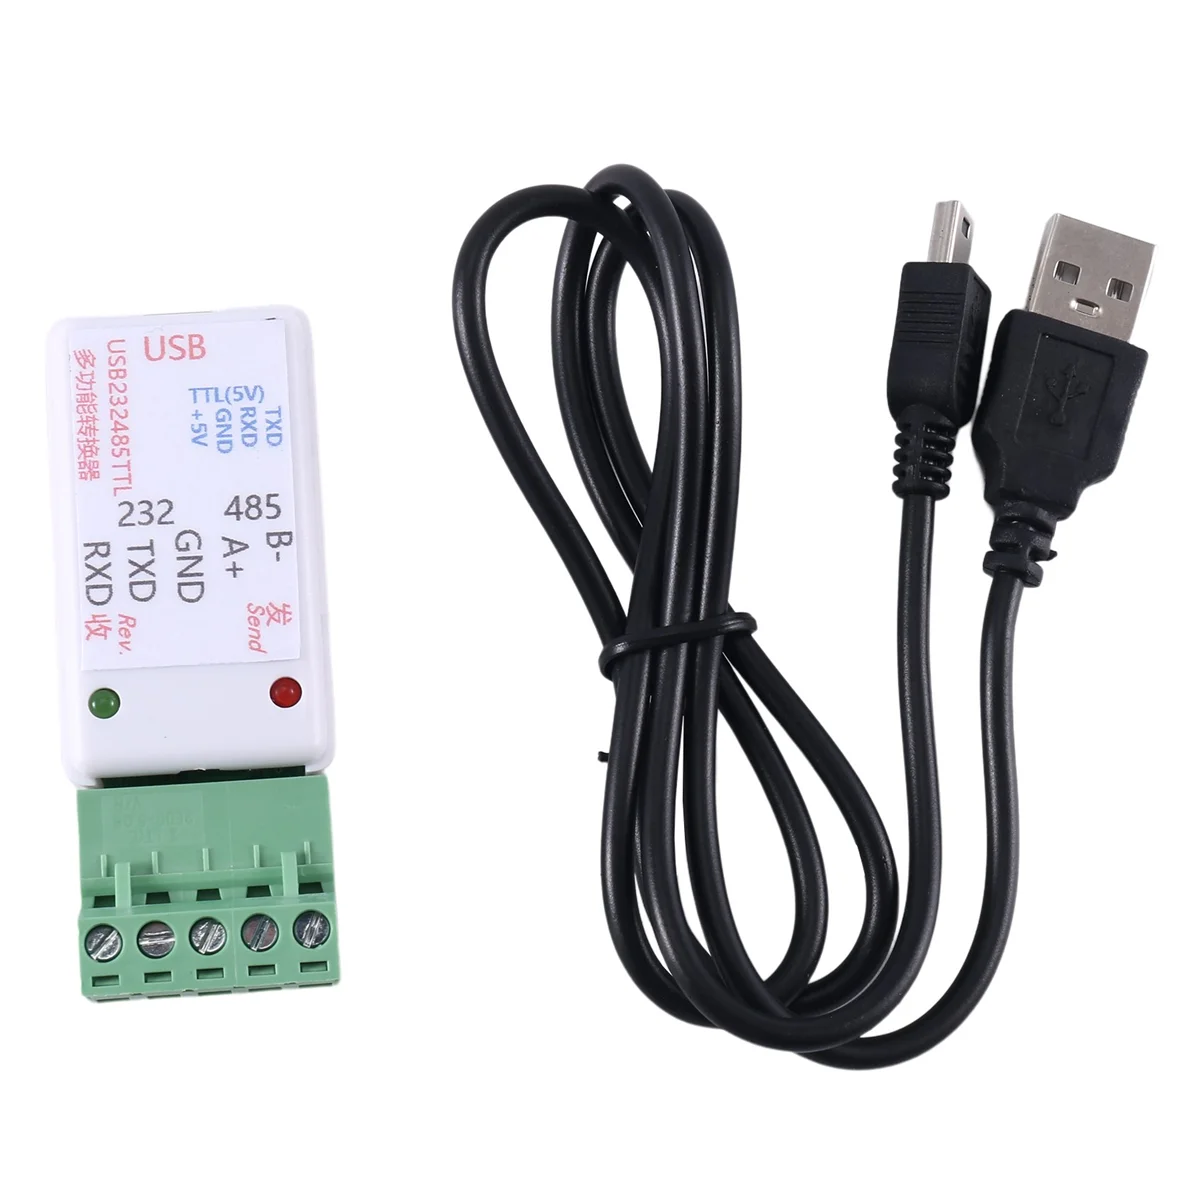 

3 In1 USB 232 485 TO RS485 / USB TO RS232 / 232 TO 485 Converter Adapter Ch340 W/LED for WIN7,Linux PLC Access Control